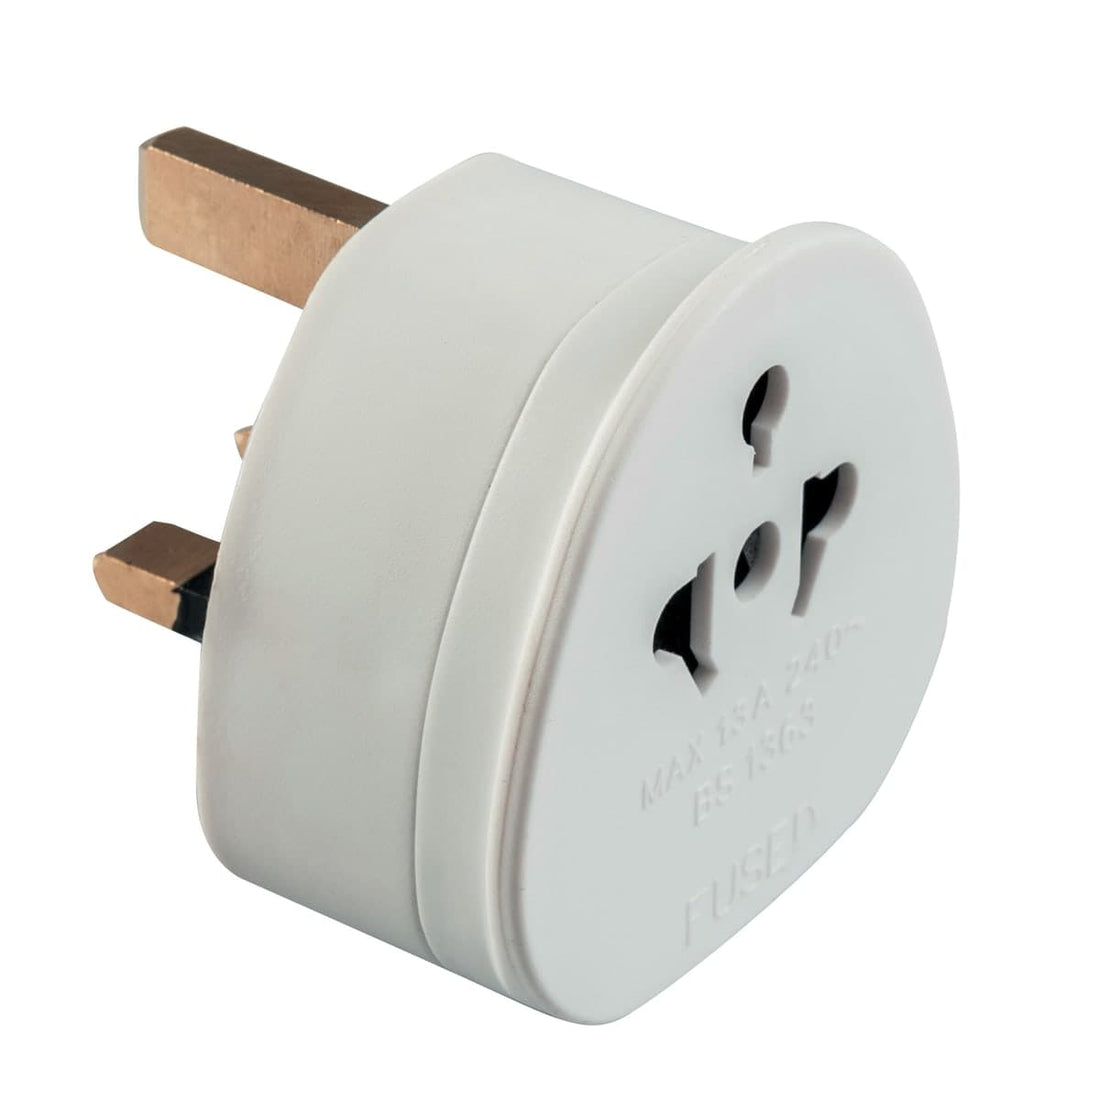 ITALY-ENGLAND TRAVEL ADAPTER WITH 13A PLUG 10A SOCKET WHITE - best price from Maltashopper.com BR420003068